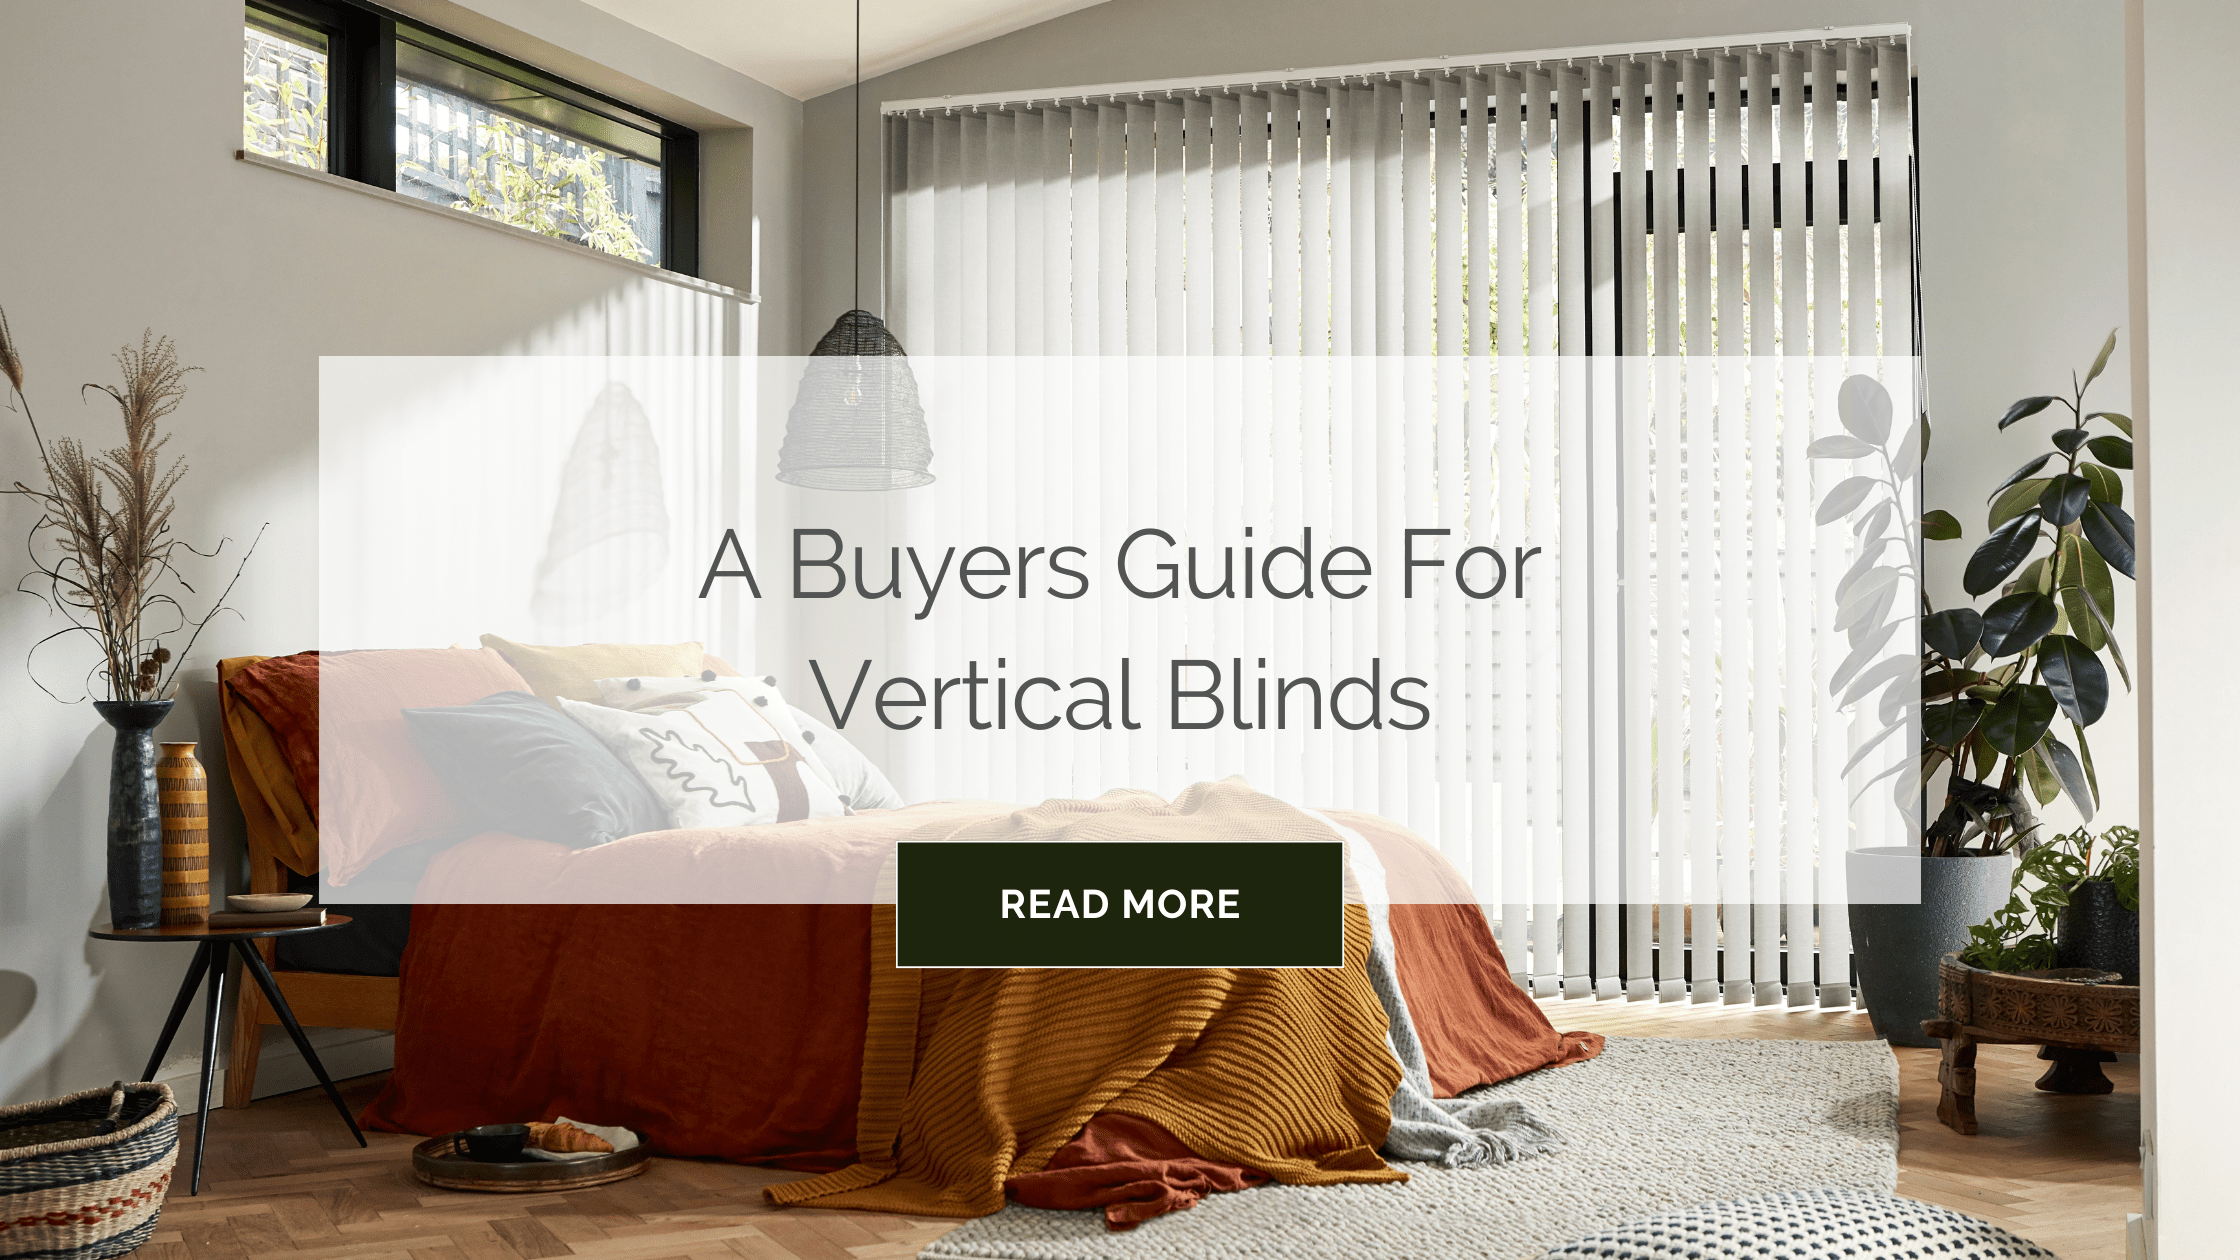 Buyers Guide to Vertical Blinds